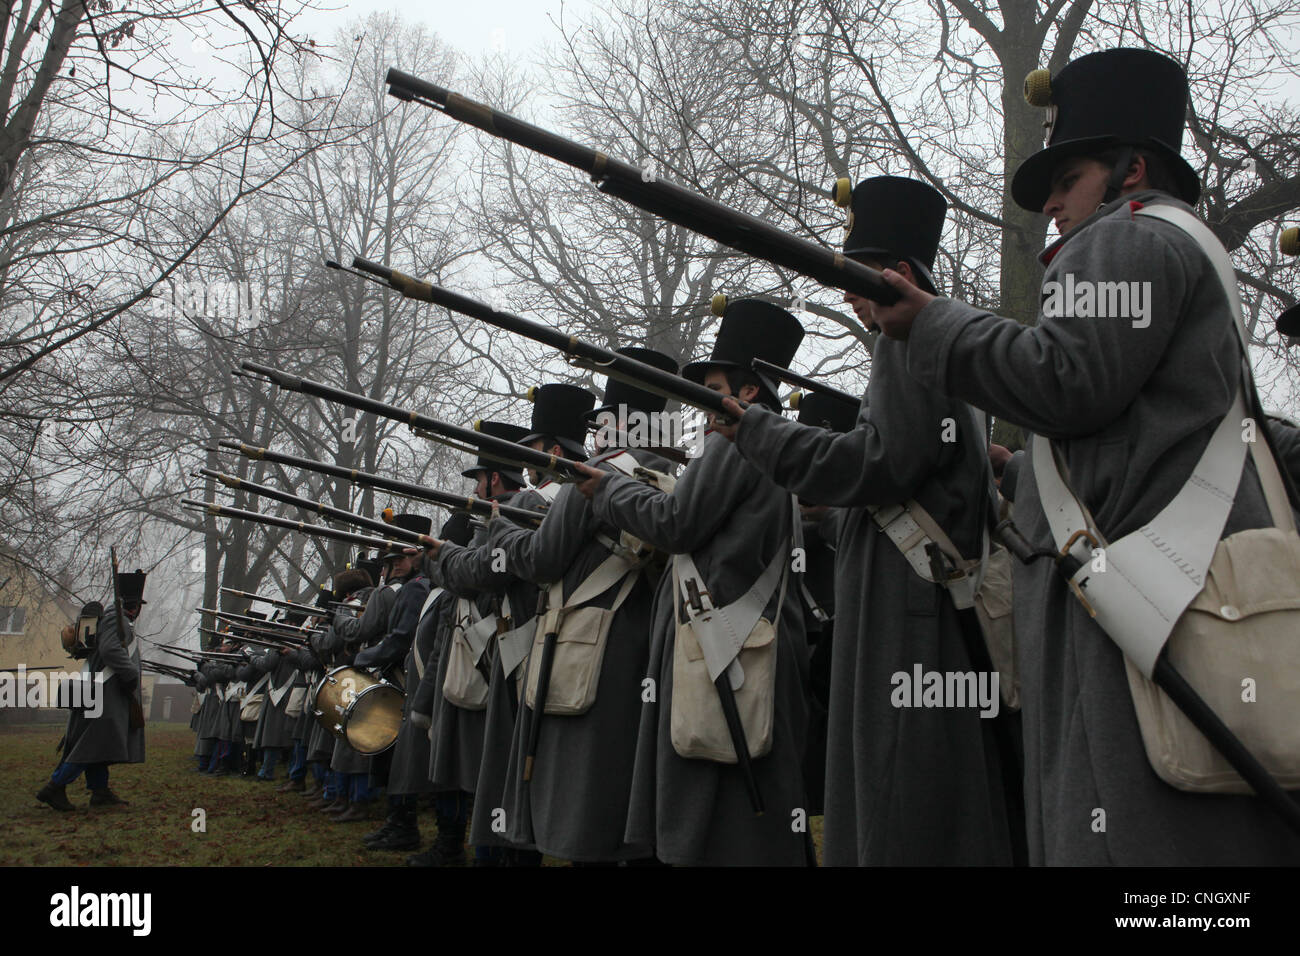 Training of Austrian soldiers in Tvarozna, Czech Republic. Re-enactment of the Battle of Austerlitz (1805). Stock Photo